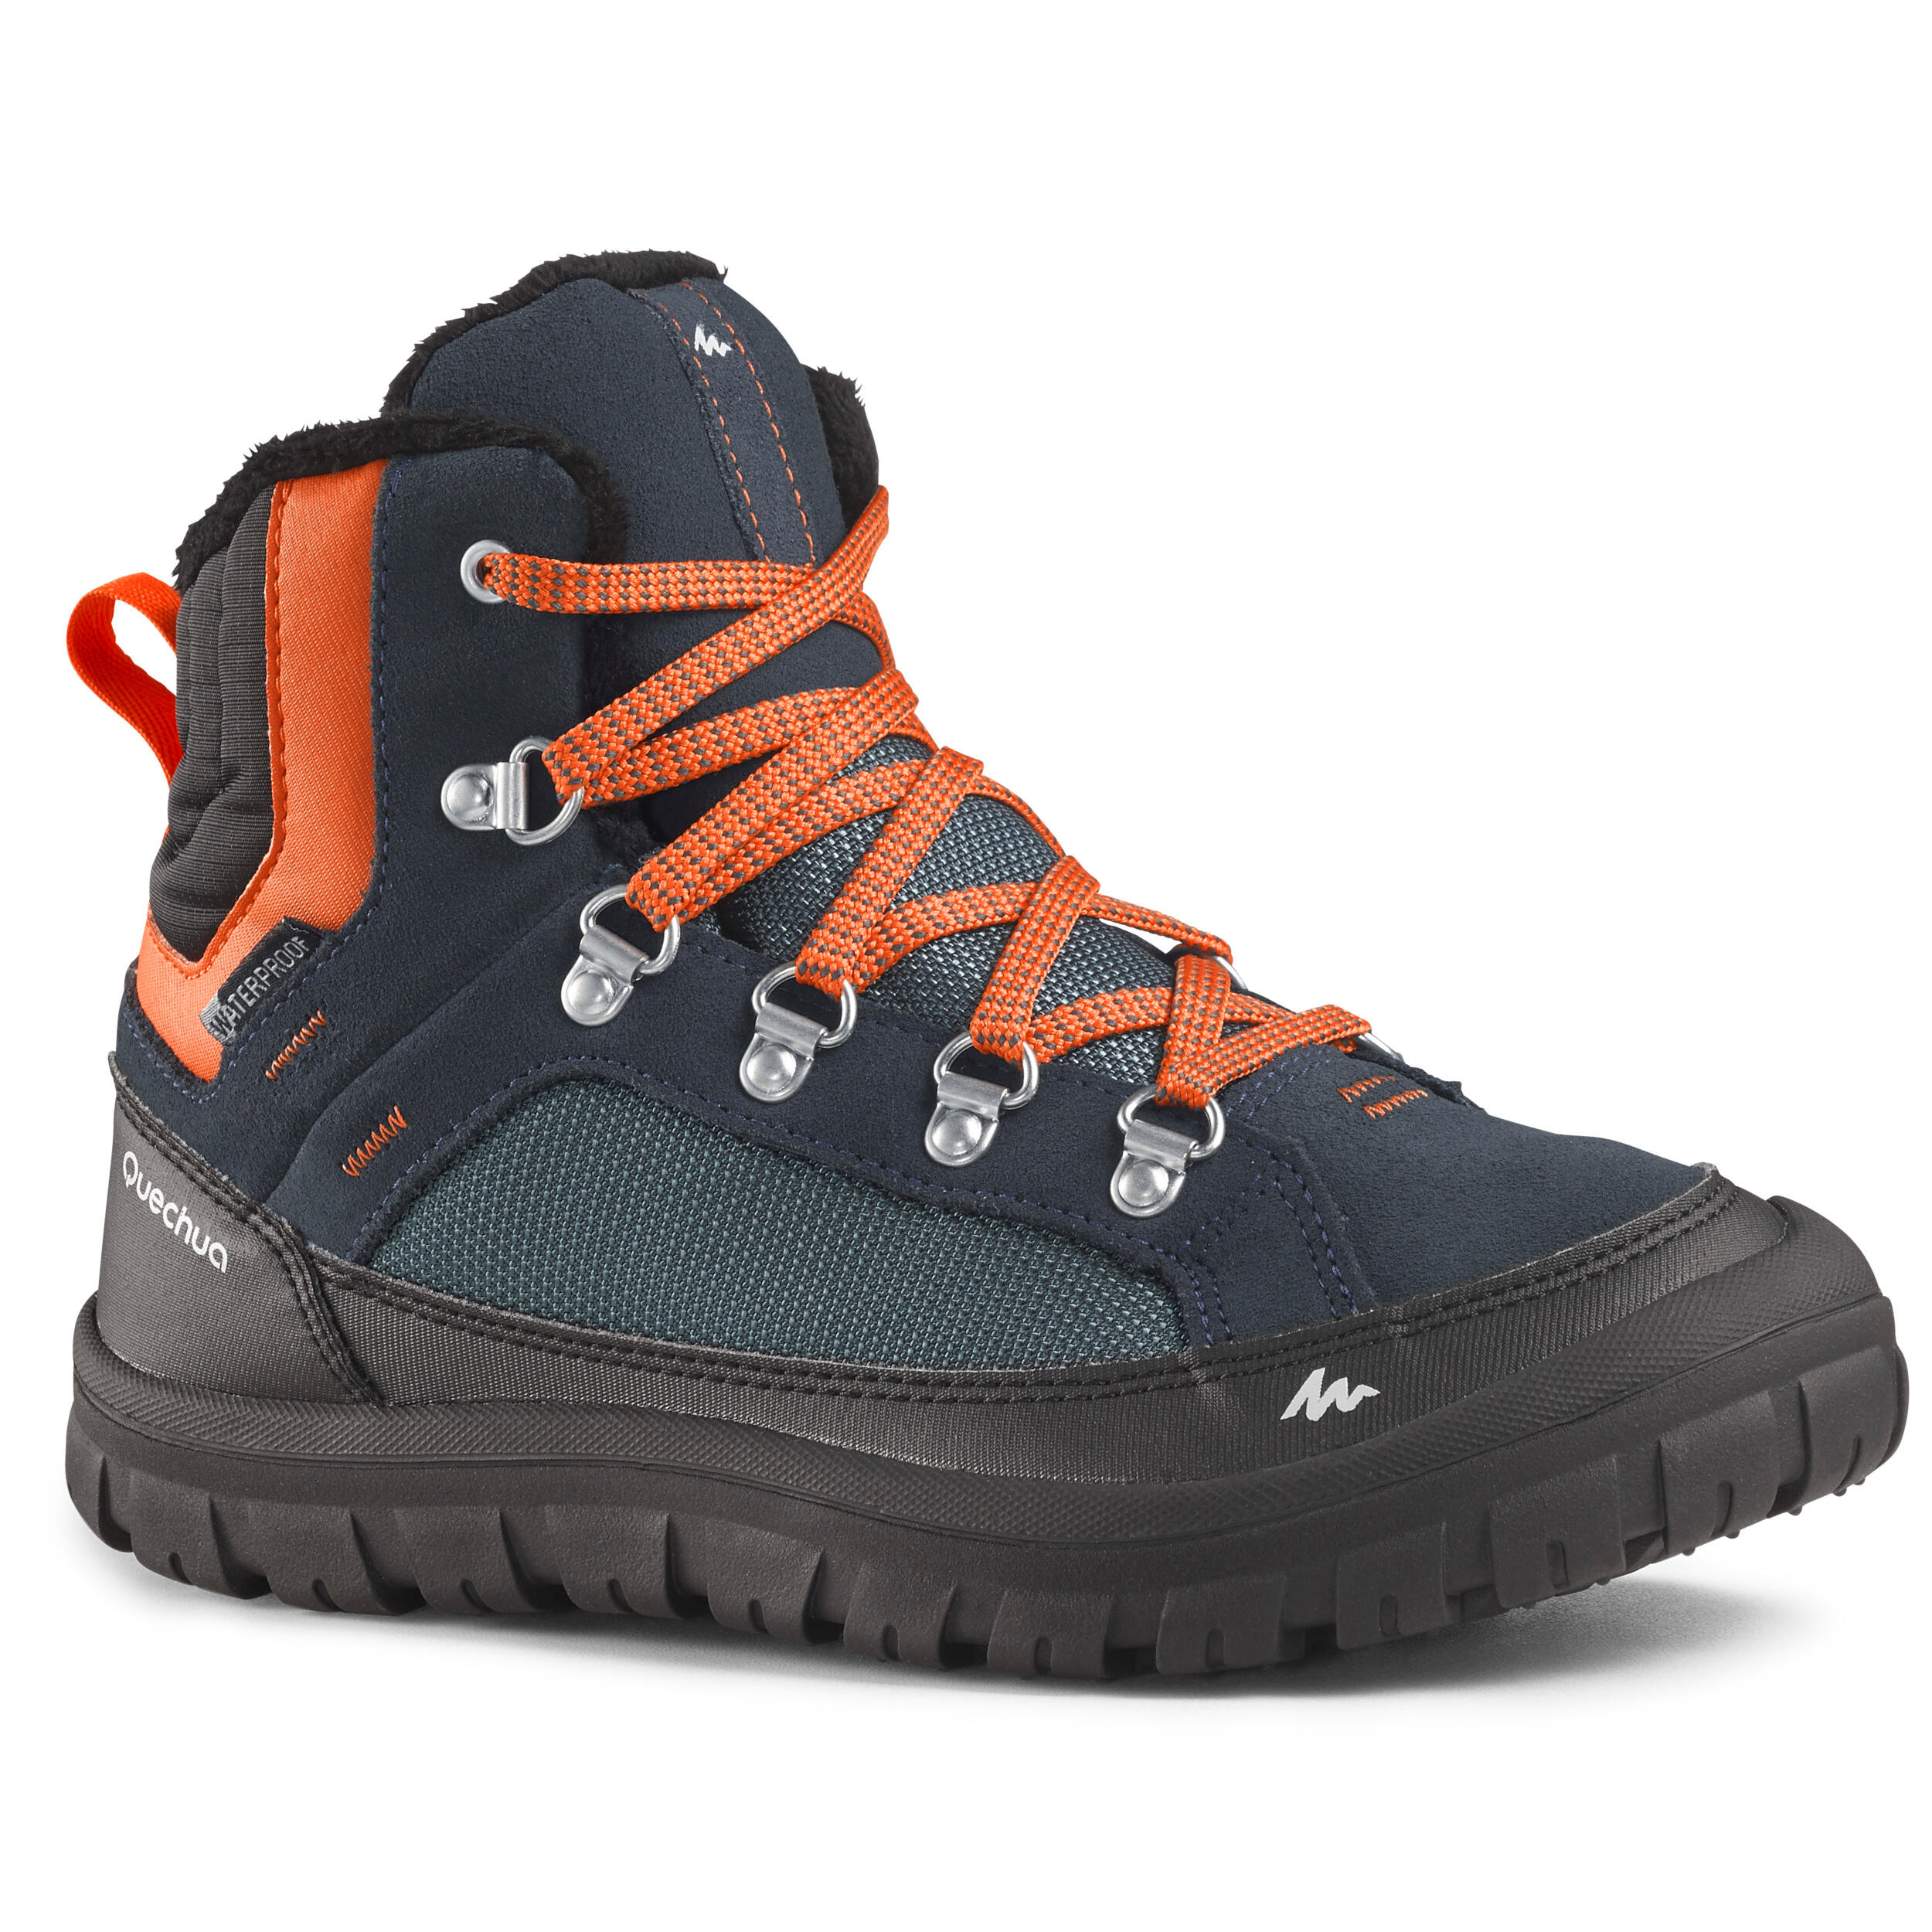 size up hiking boots